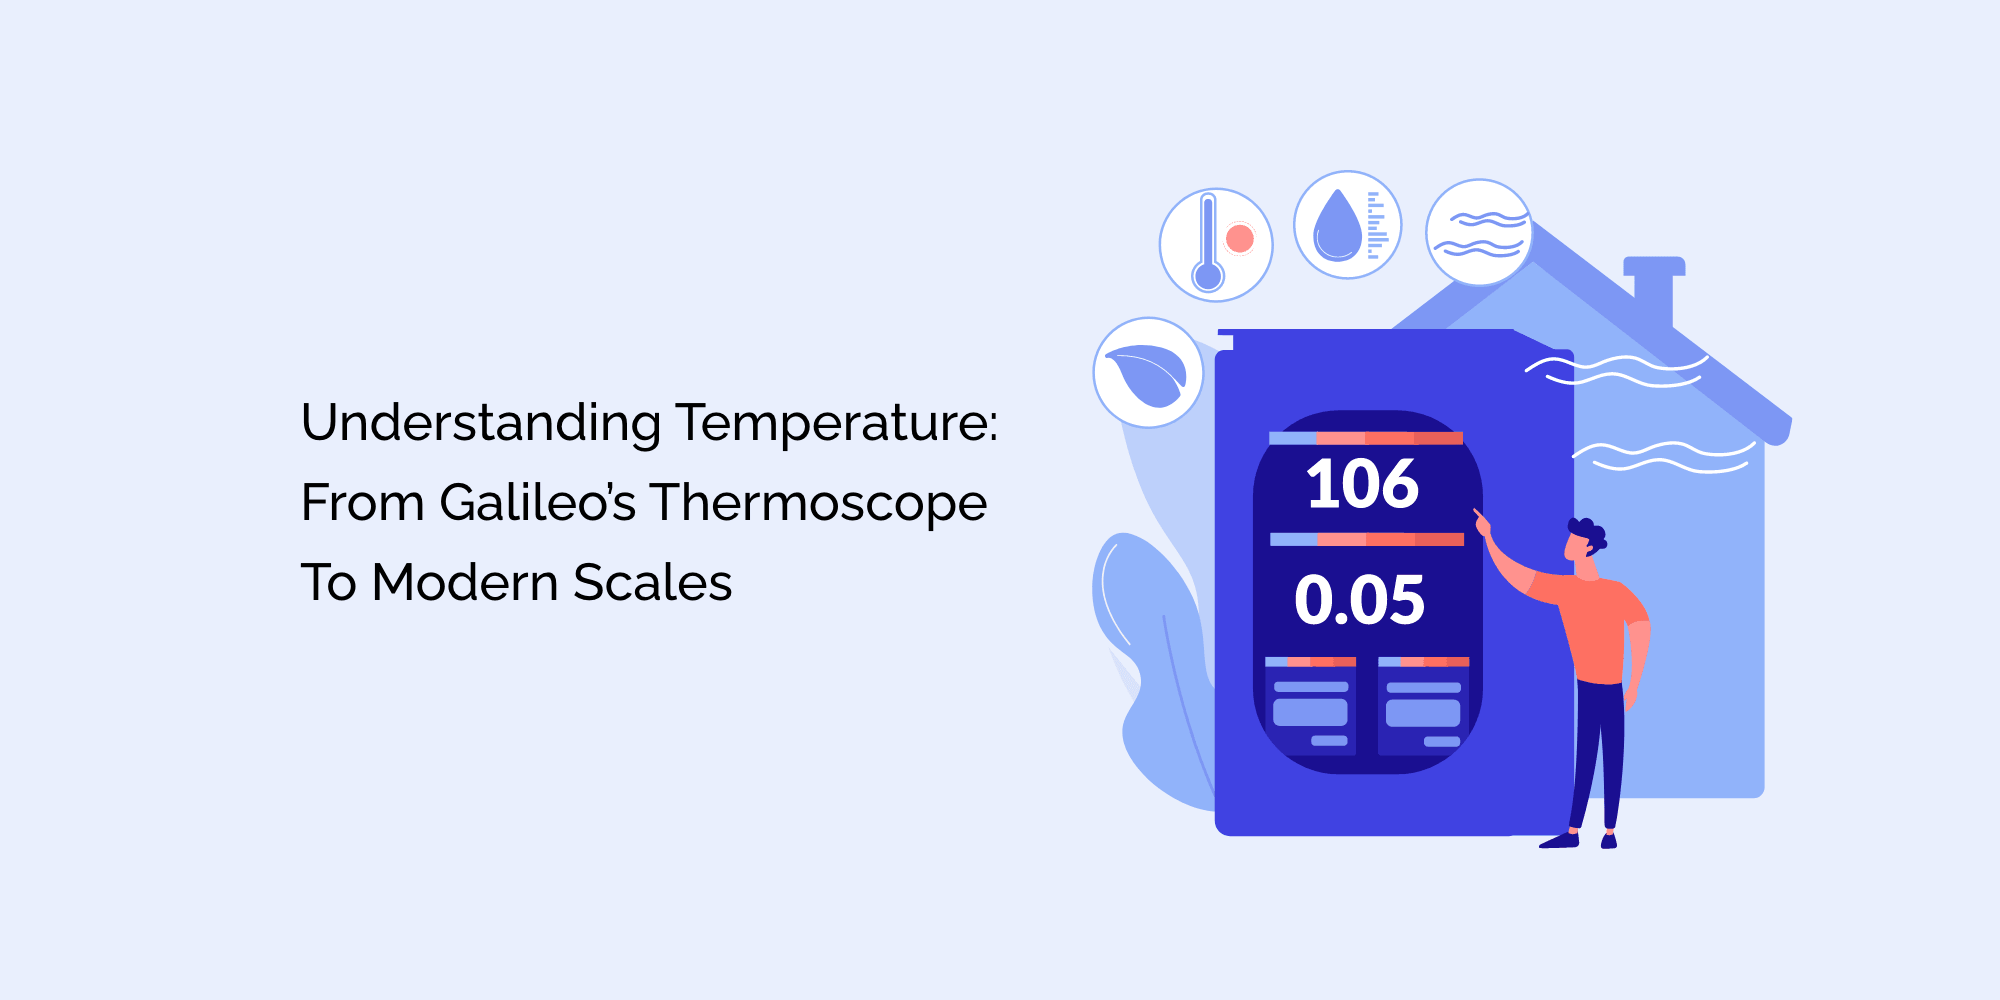 Understanding Temperature: From Galileo's Thermoscope to Modern Scales